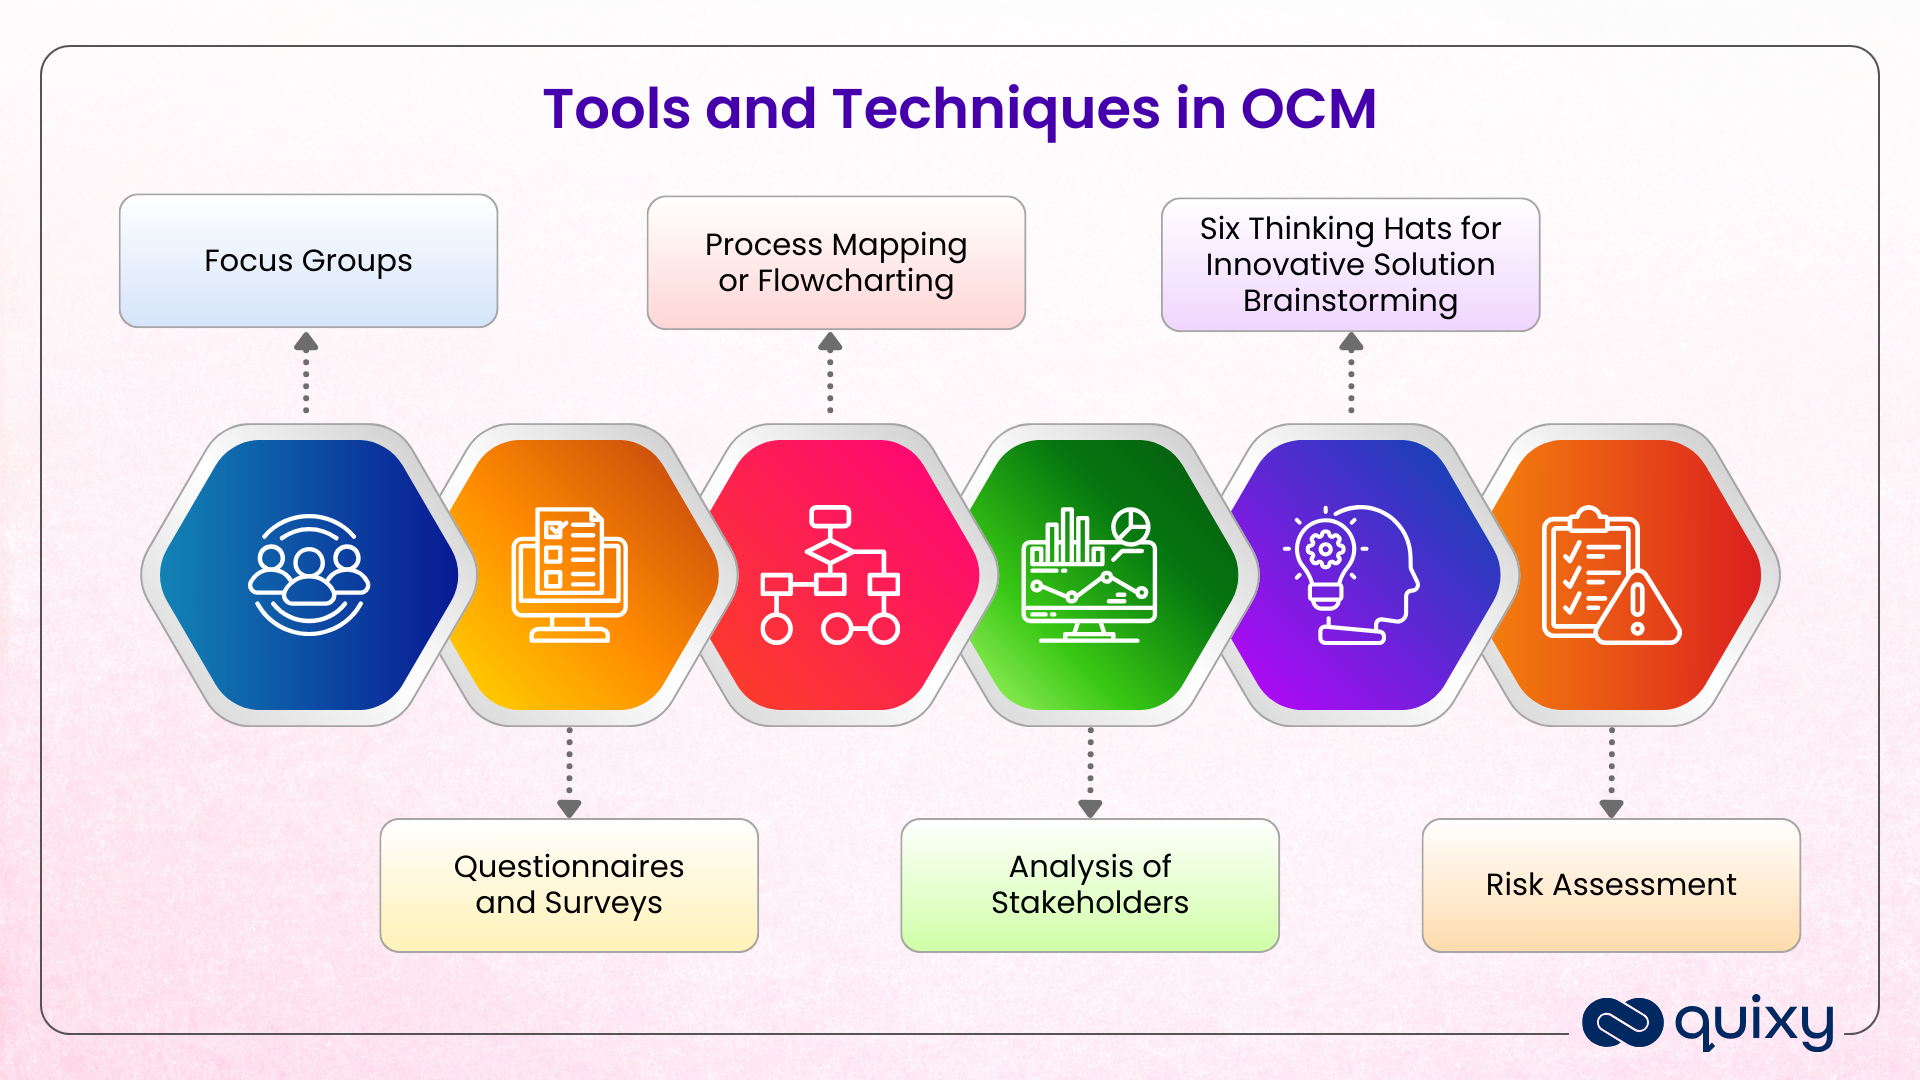 Tools and Techniques in OCM